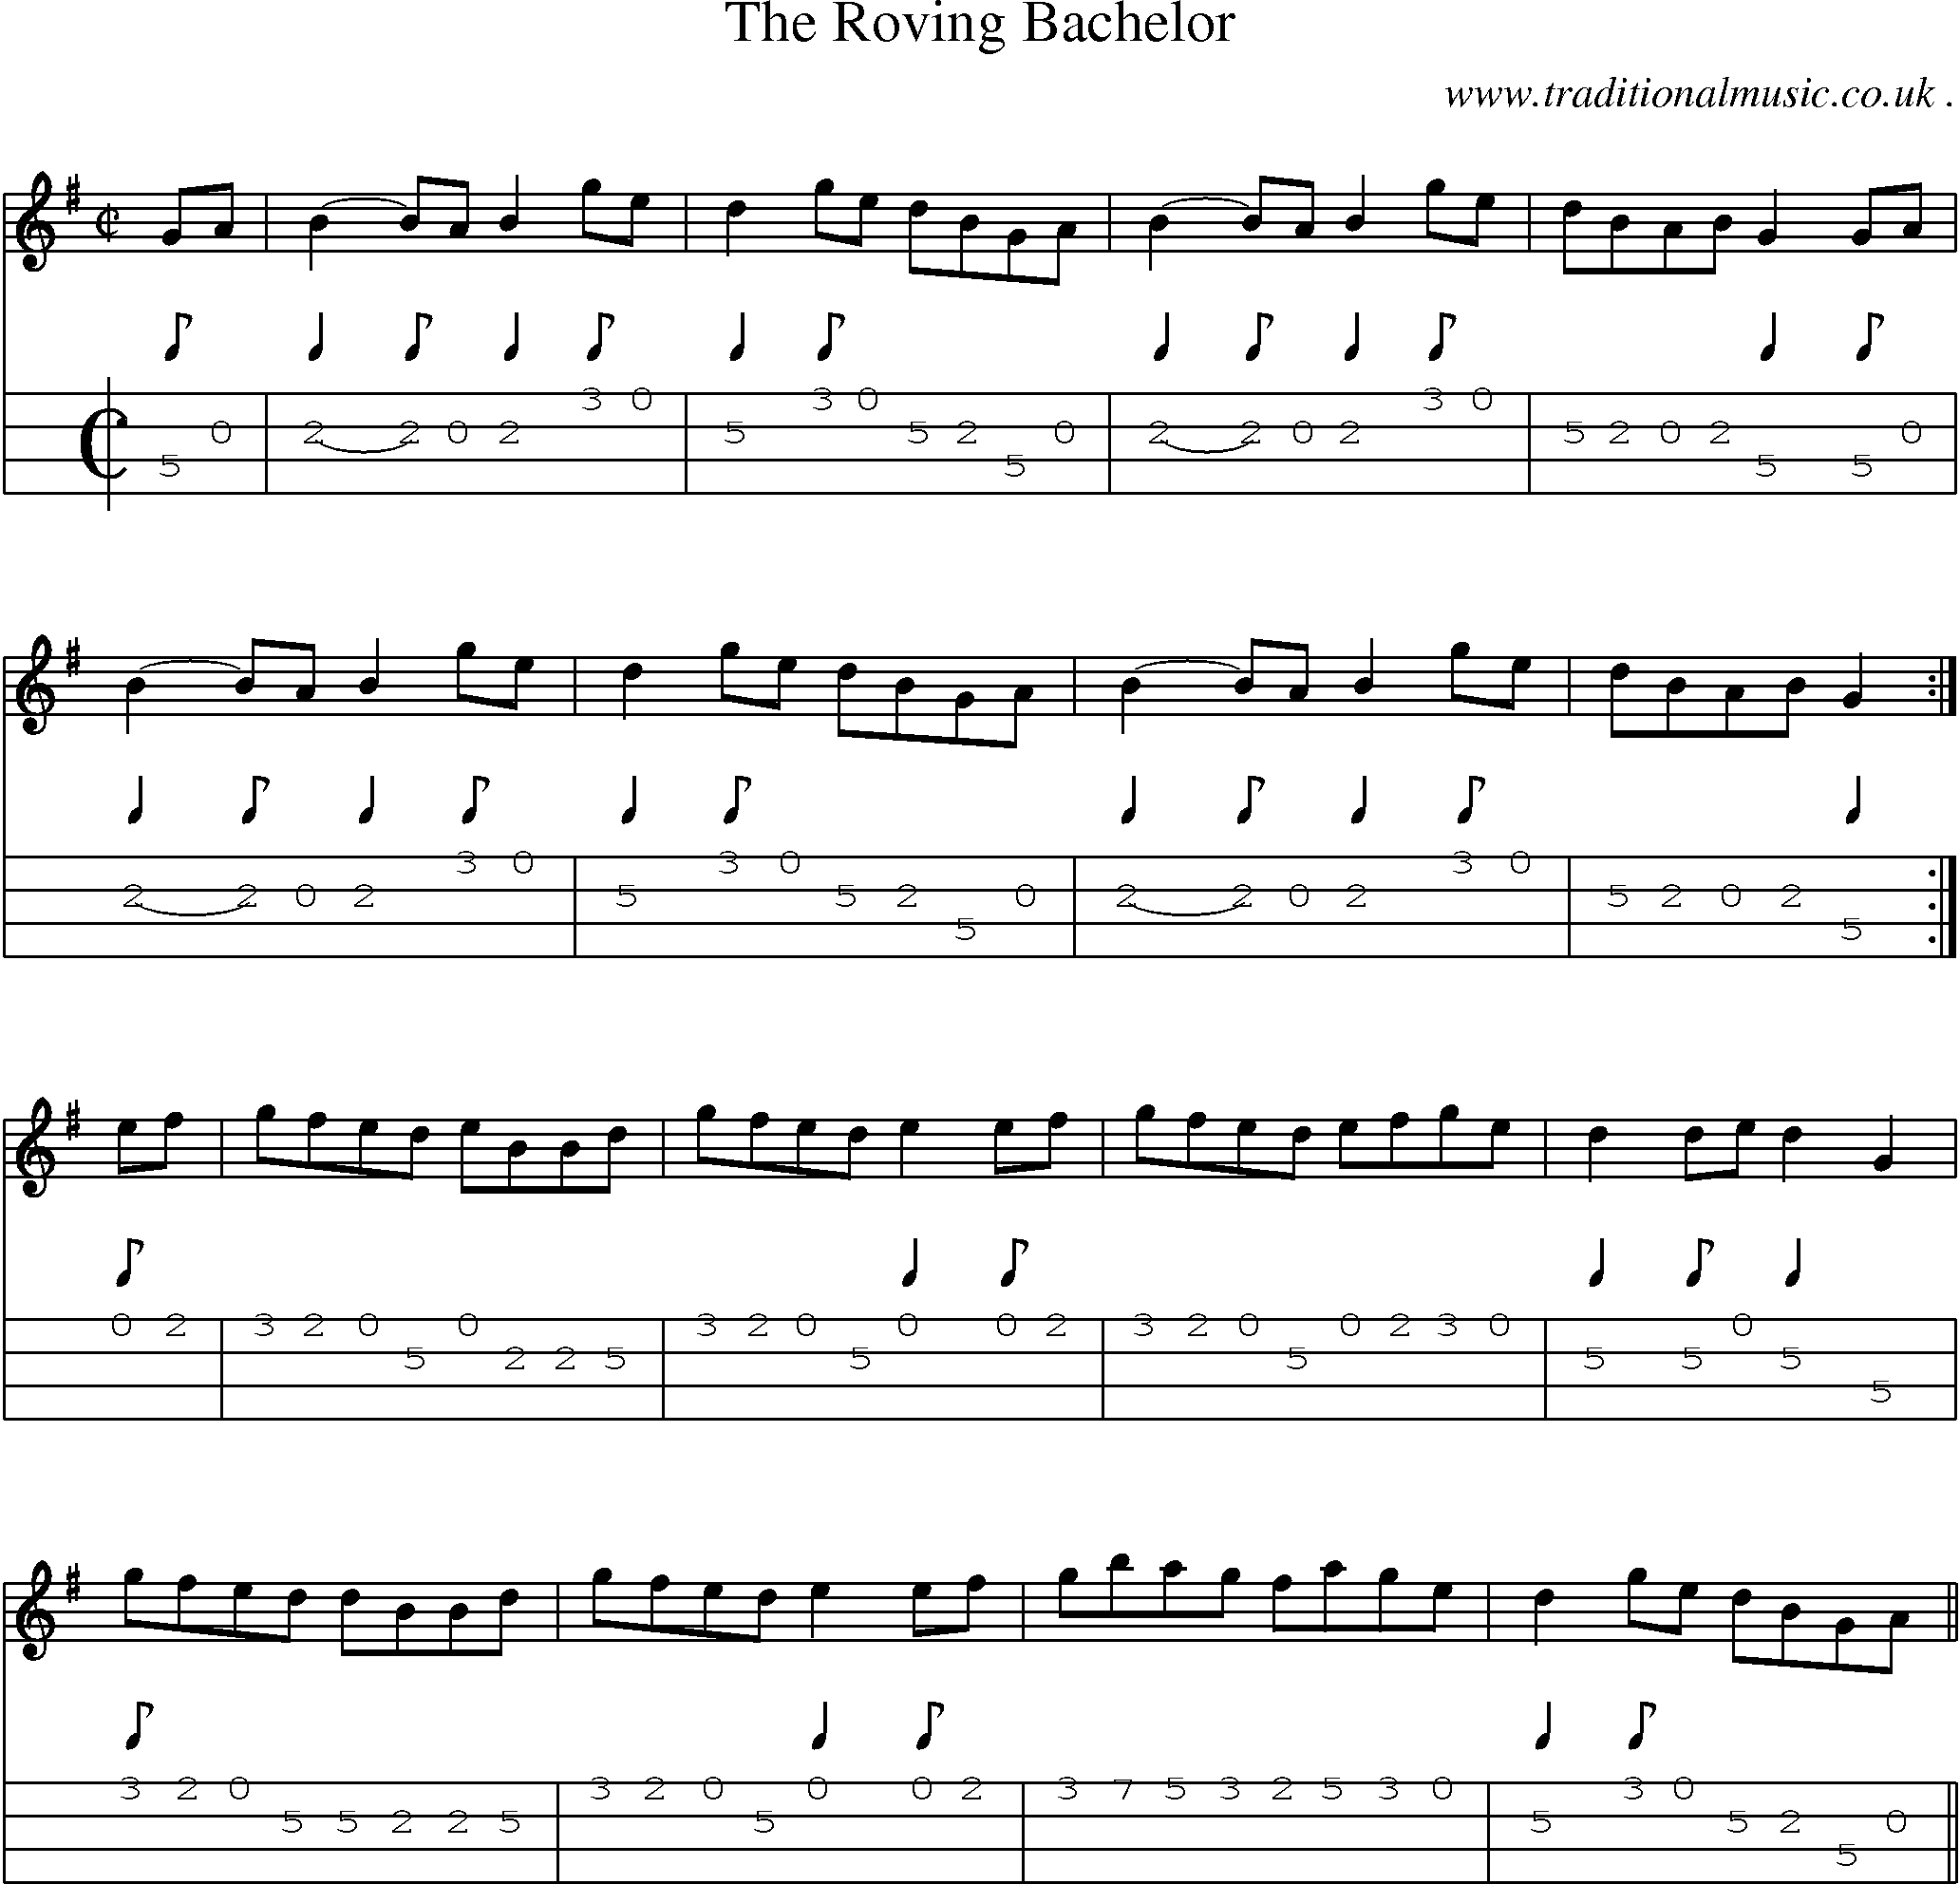 Sheet-Music and Mandolin Tabs for The Roving Bachelor